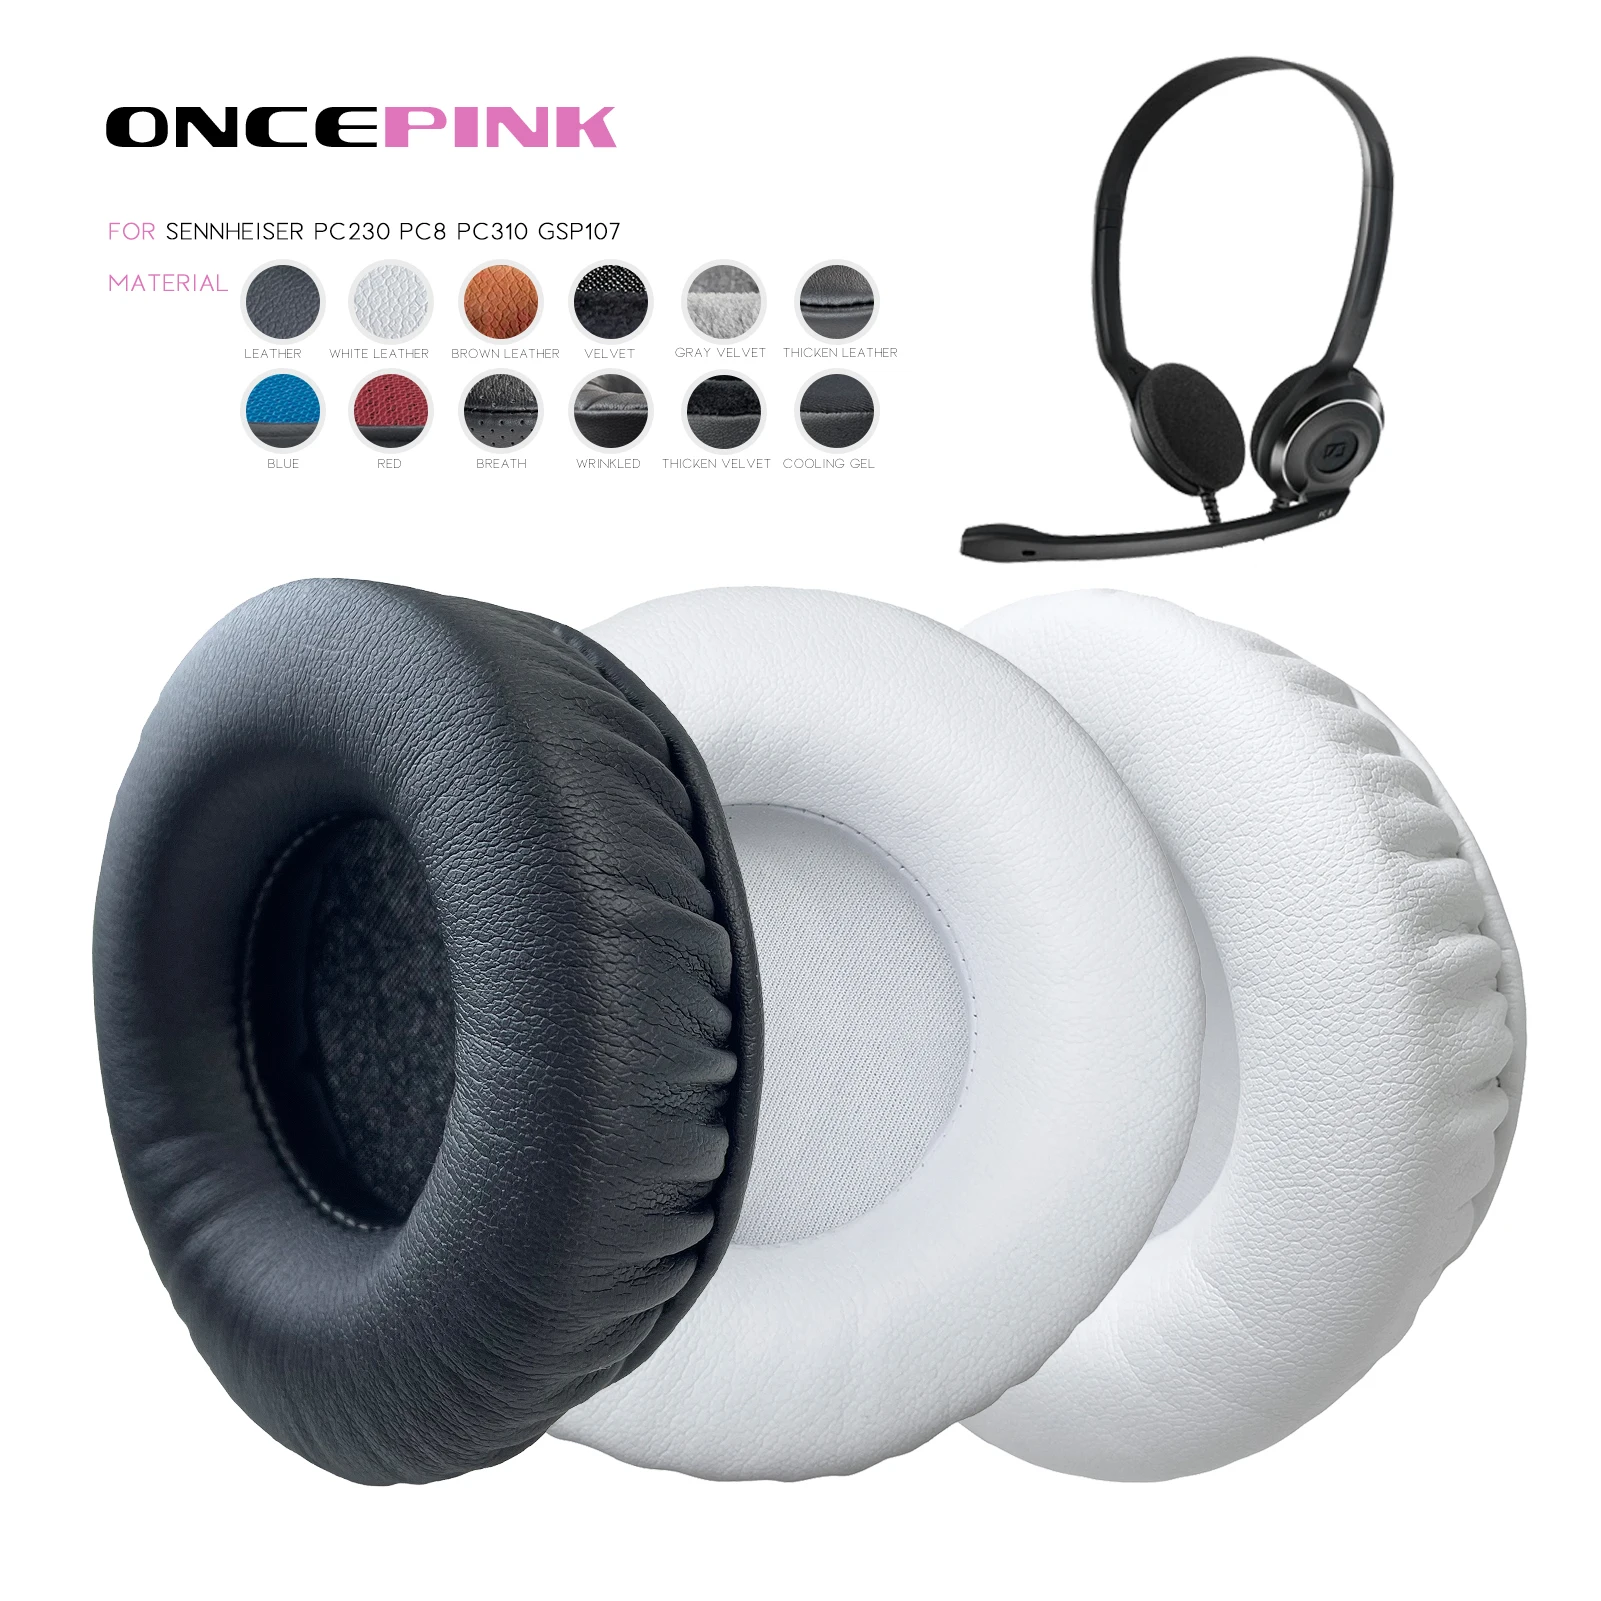 Oncepink Replacement Ear Pads For Sennheiser Pc230 Pc8 Pc310 Gsp107  Headphone Cushion Protein Leather Earmuffs - Protective Sleeve - AliExpress